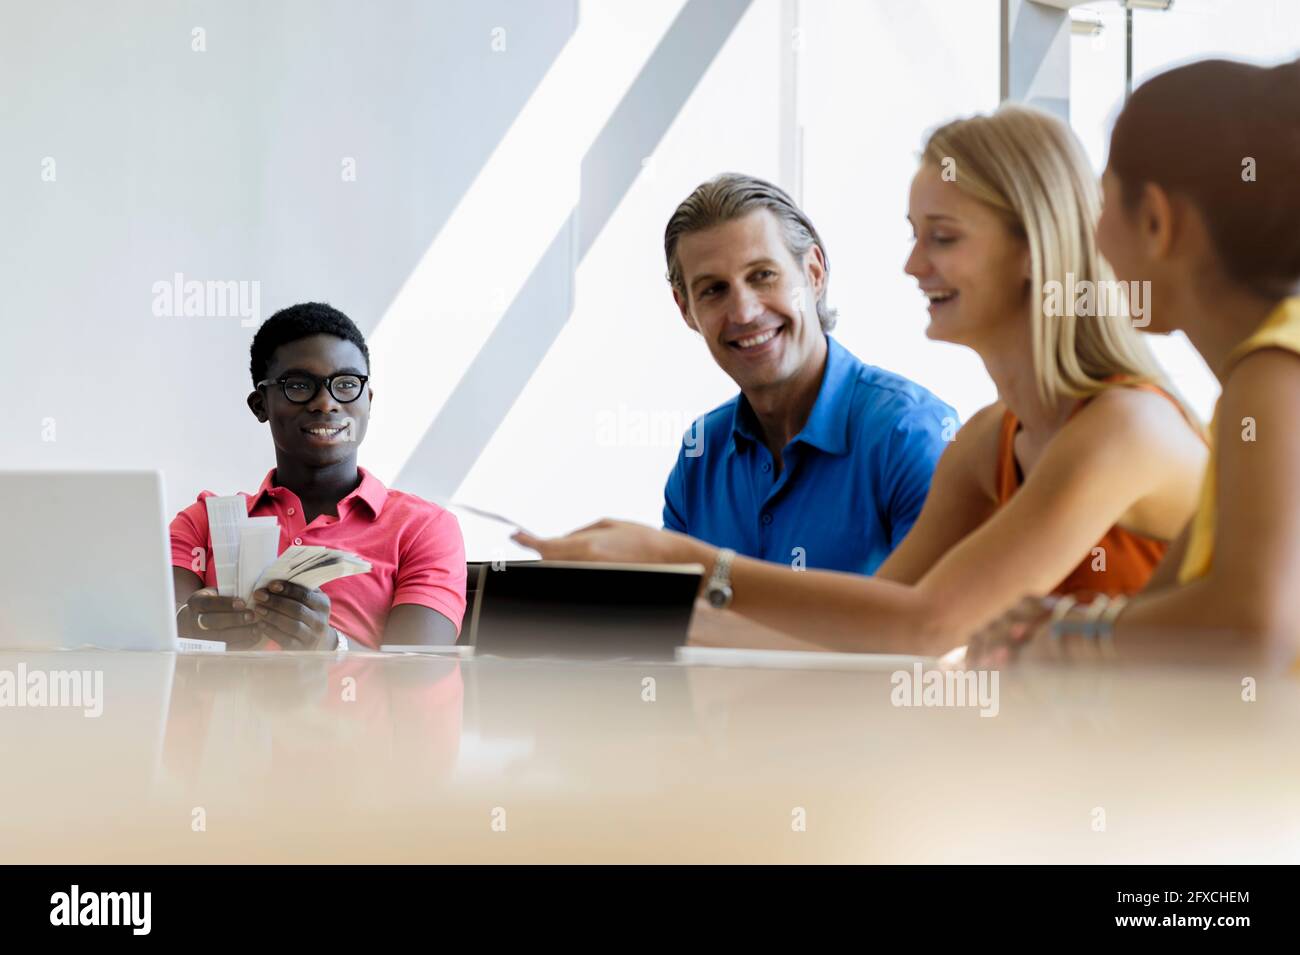 Male and female professionals smiling in business meeting at office Stock Photo